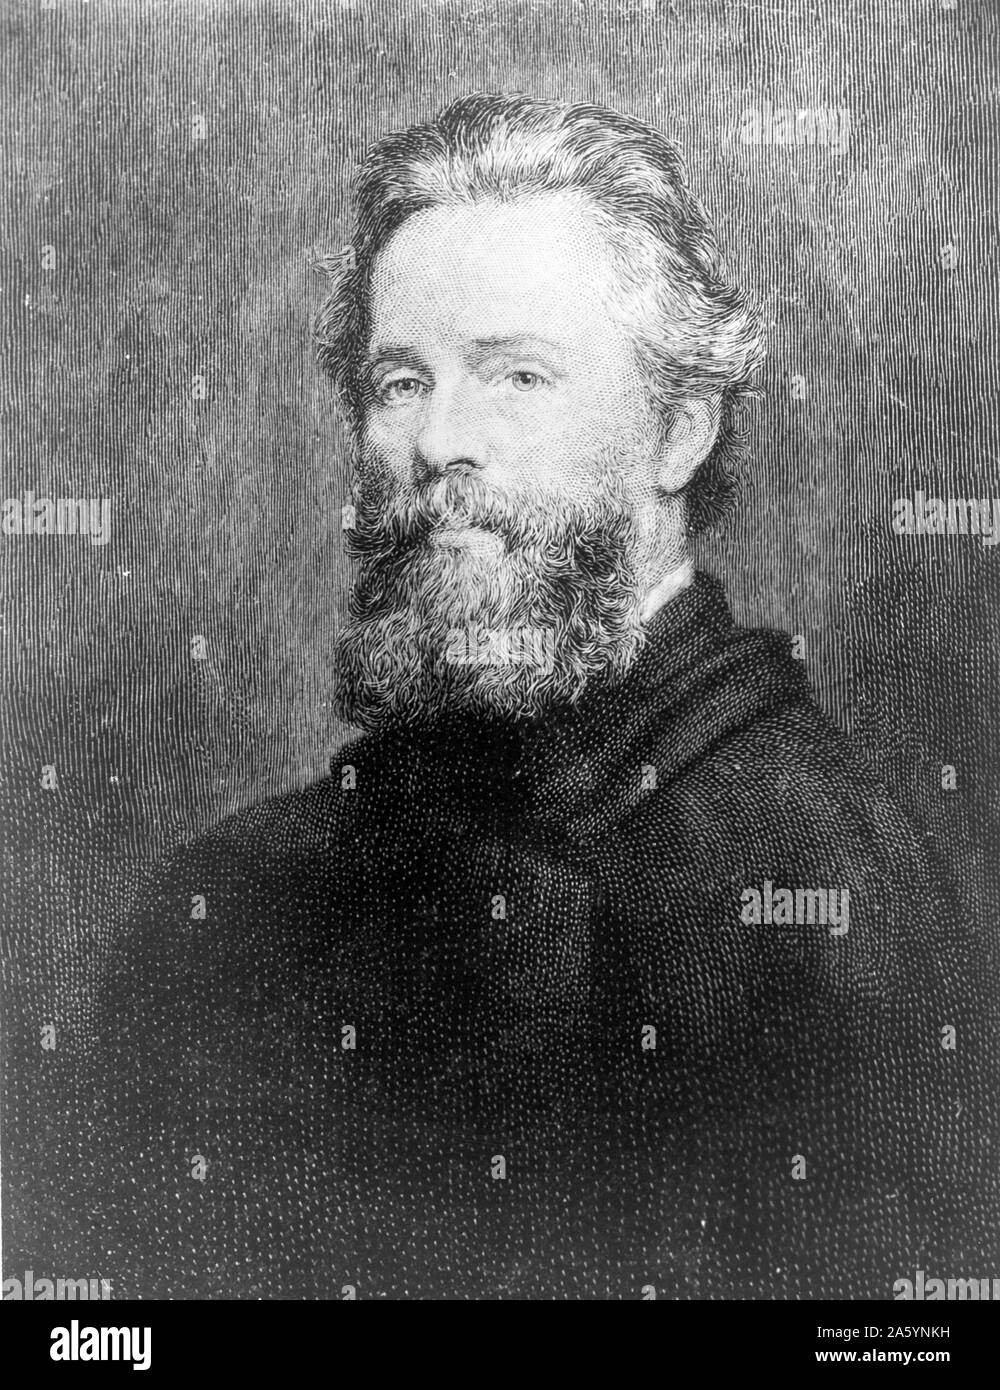 Herman Melville, (American author), head-and-shoulders portrait, facing left. Circa 1944. Photograph of an etching of Melville after a portrait by Joseph O. Eaton. Stock Photo